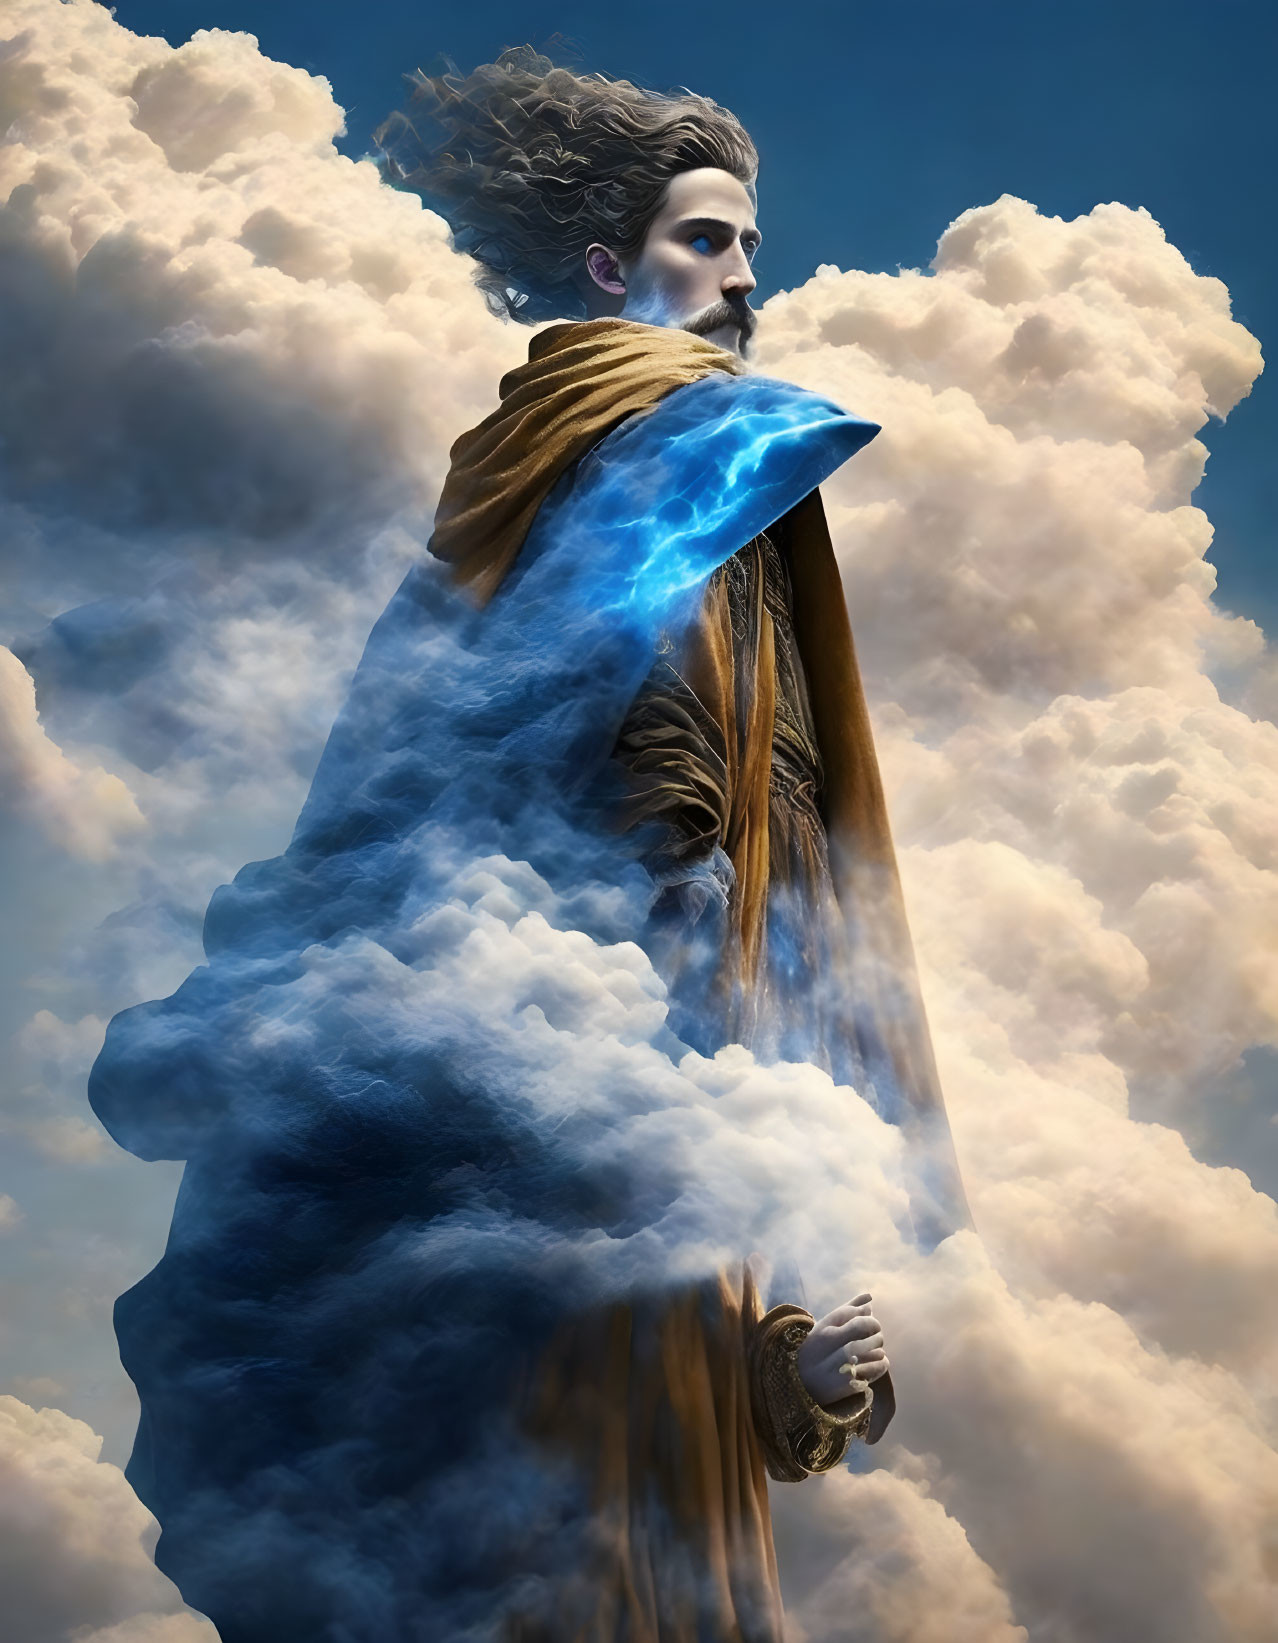 Regal figure with flowing hair in clouds and glowing blue light